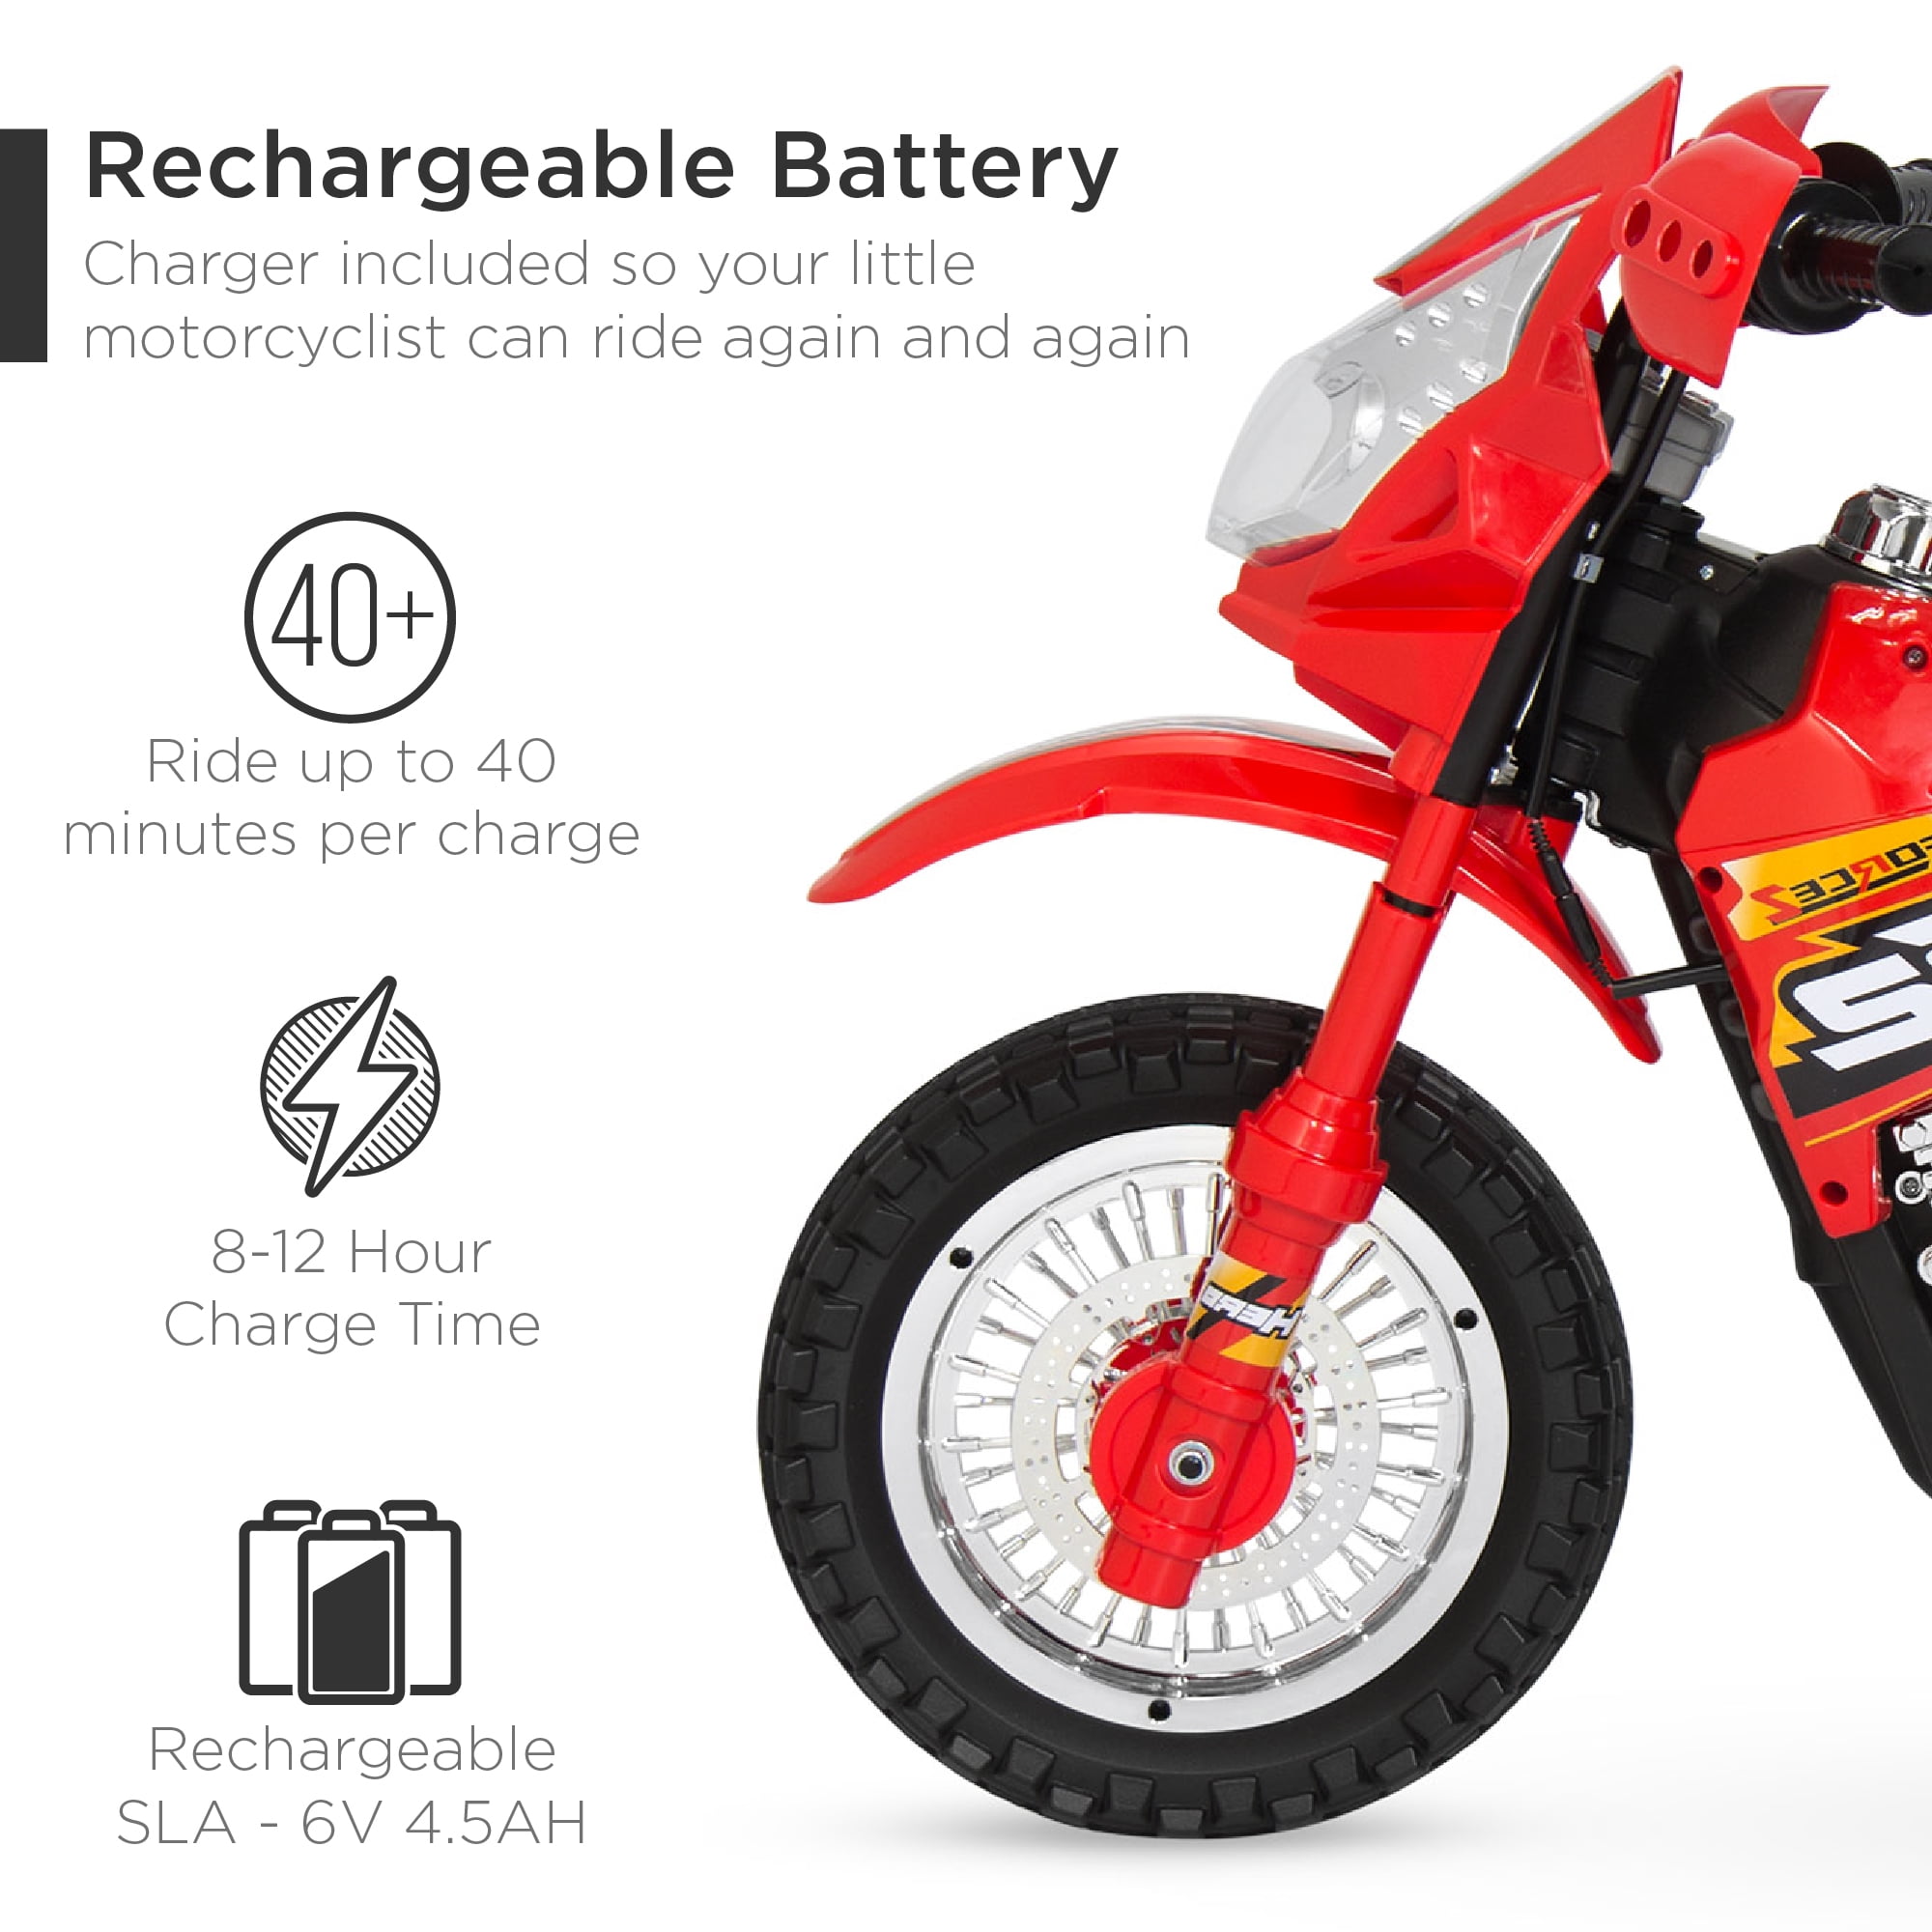 Red Training Wheels Best Choice Products 6V Kids Electric Battery-Powered Ride-On Motorcycle Dirt Bike Toy w/ 2mph Max Speed Charger Music Lights 